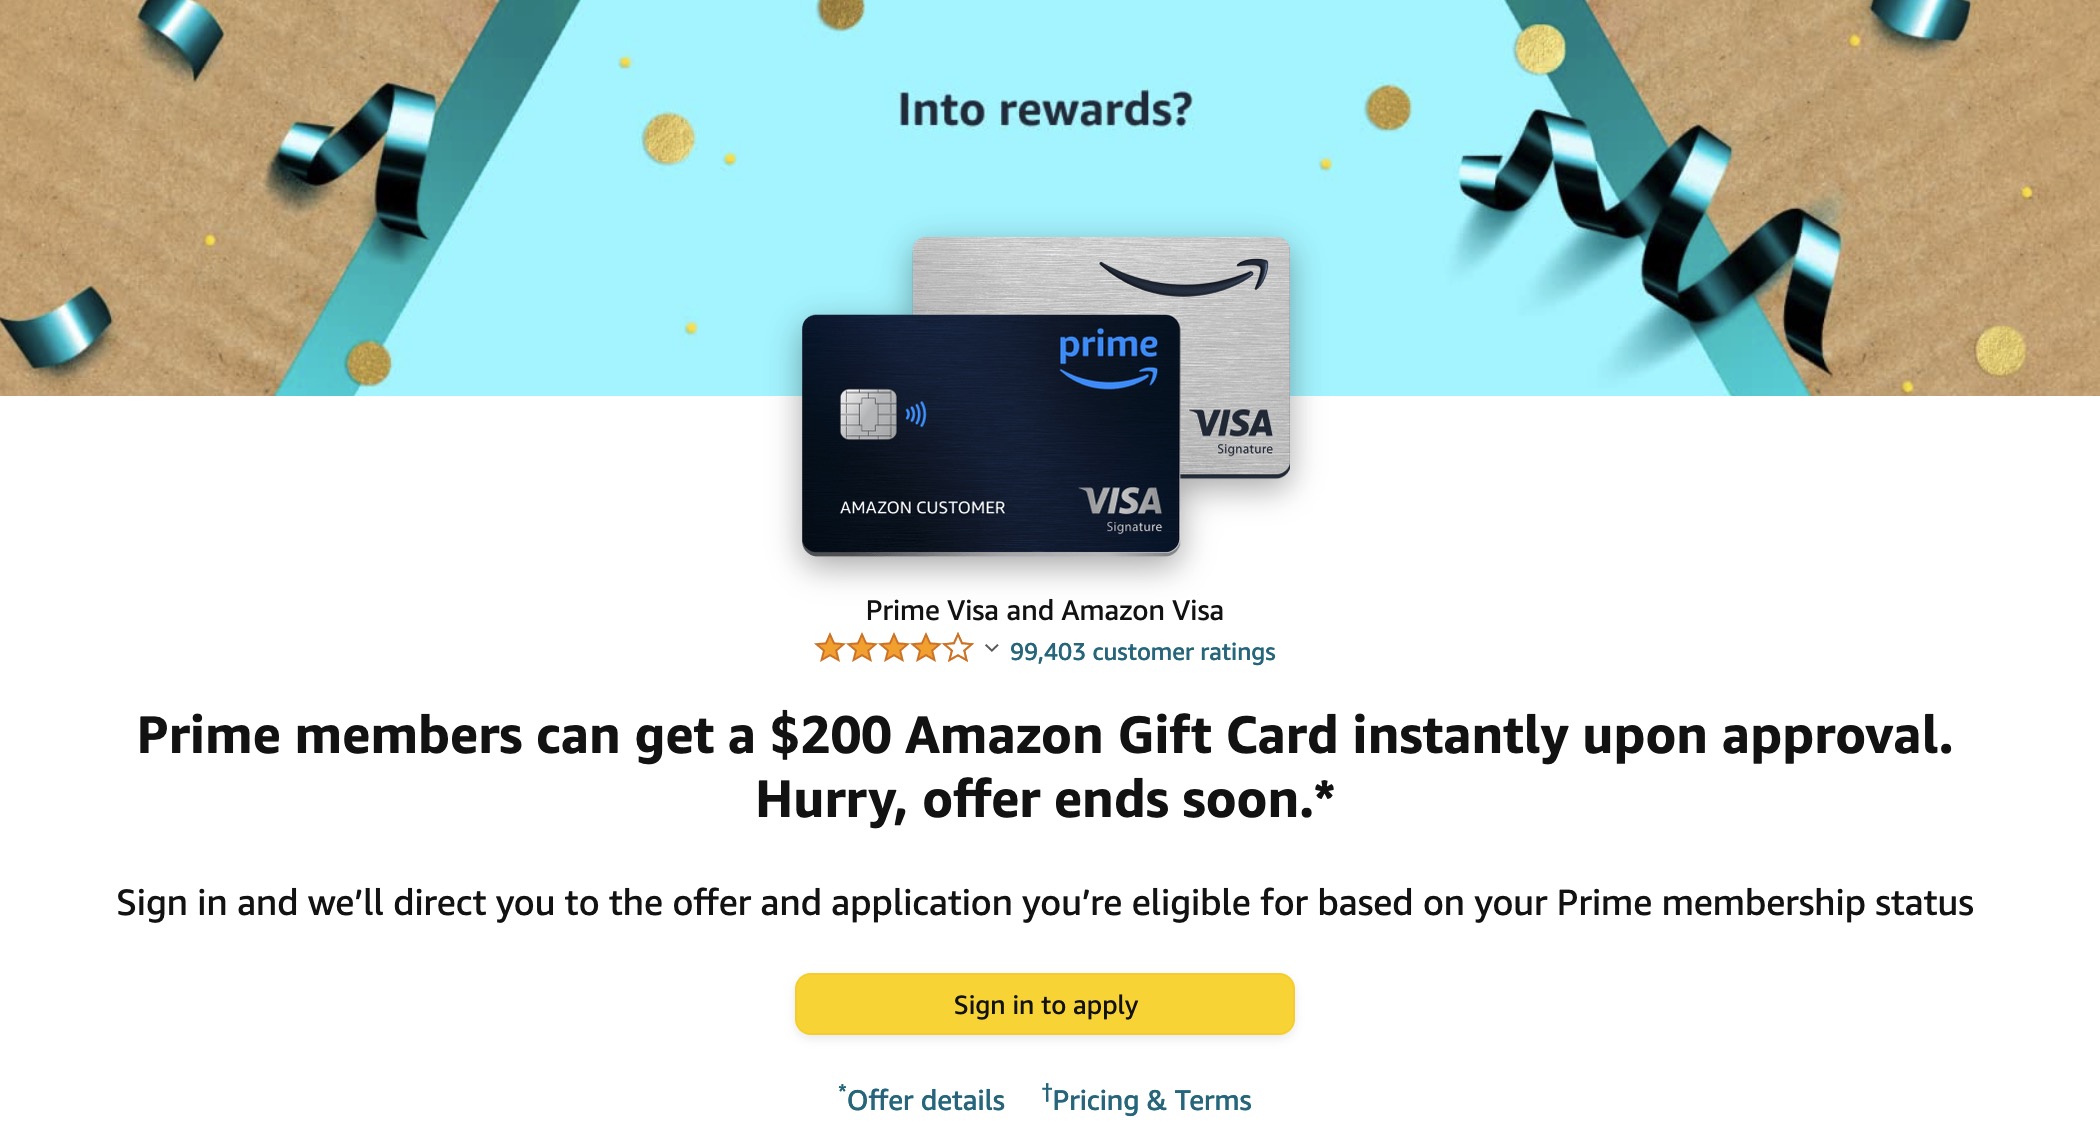 Amazon's Big Spring Sale: Score a $ Amazon Gift Card to Shop the Massive Event - CNET Money